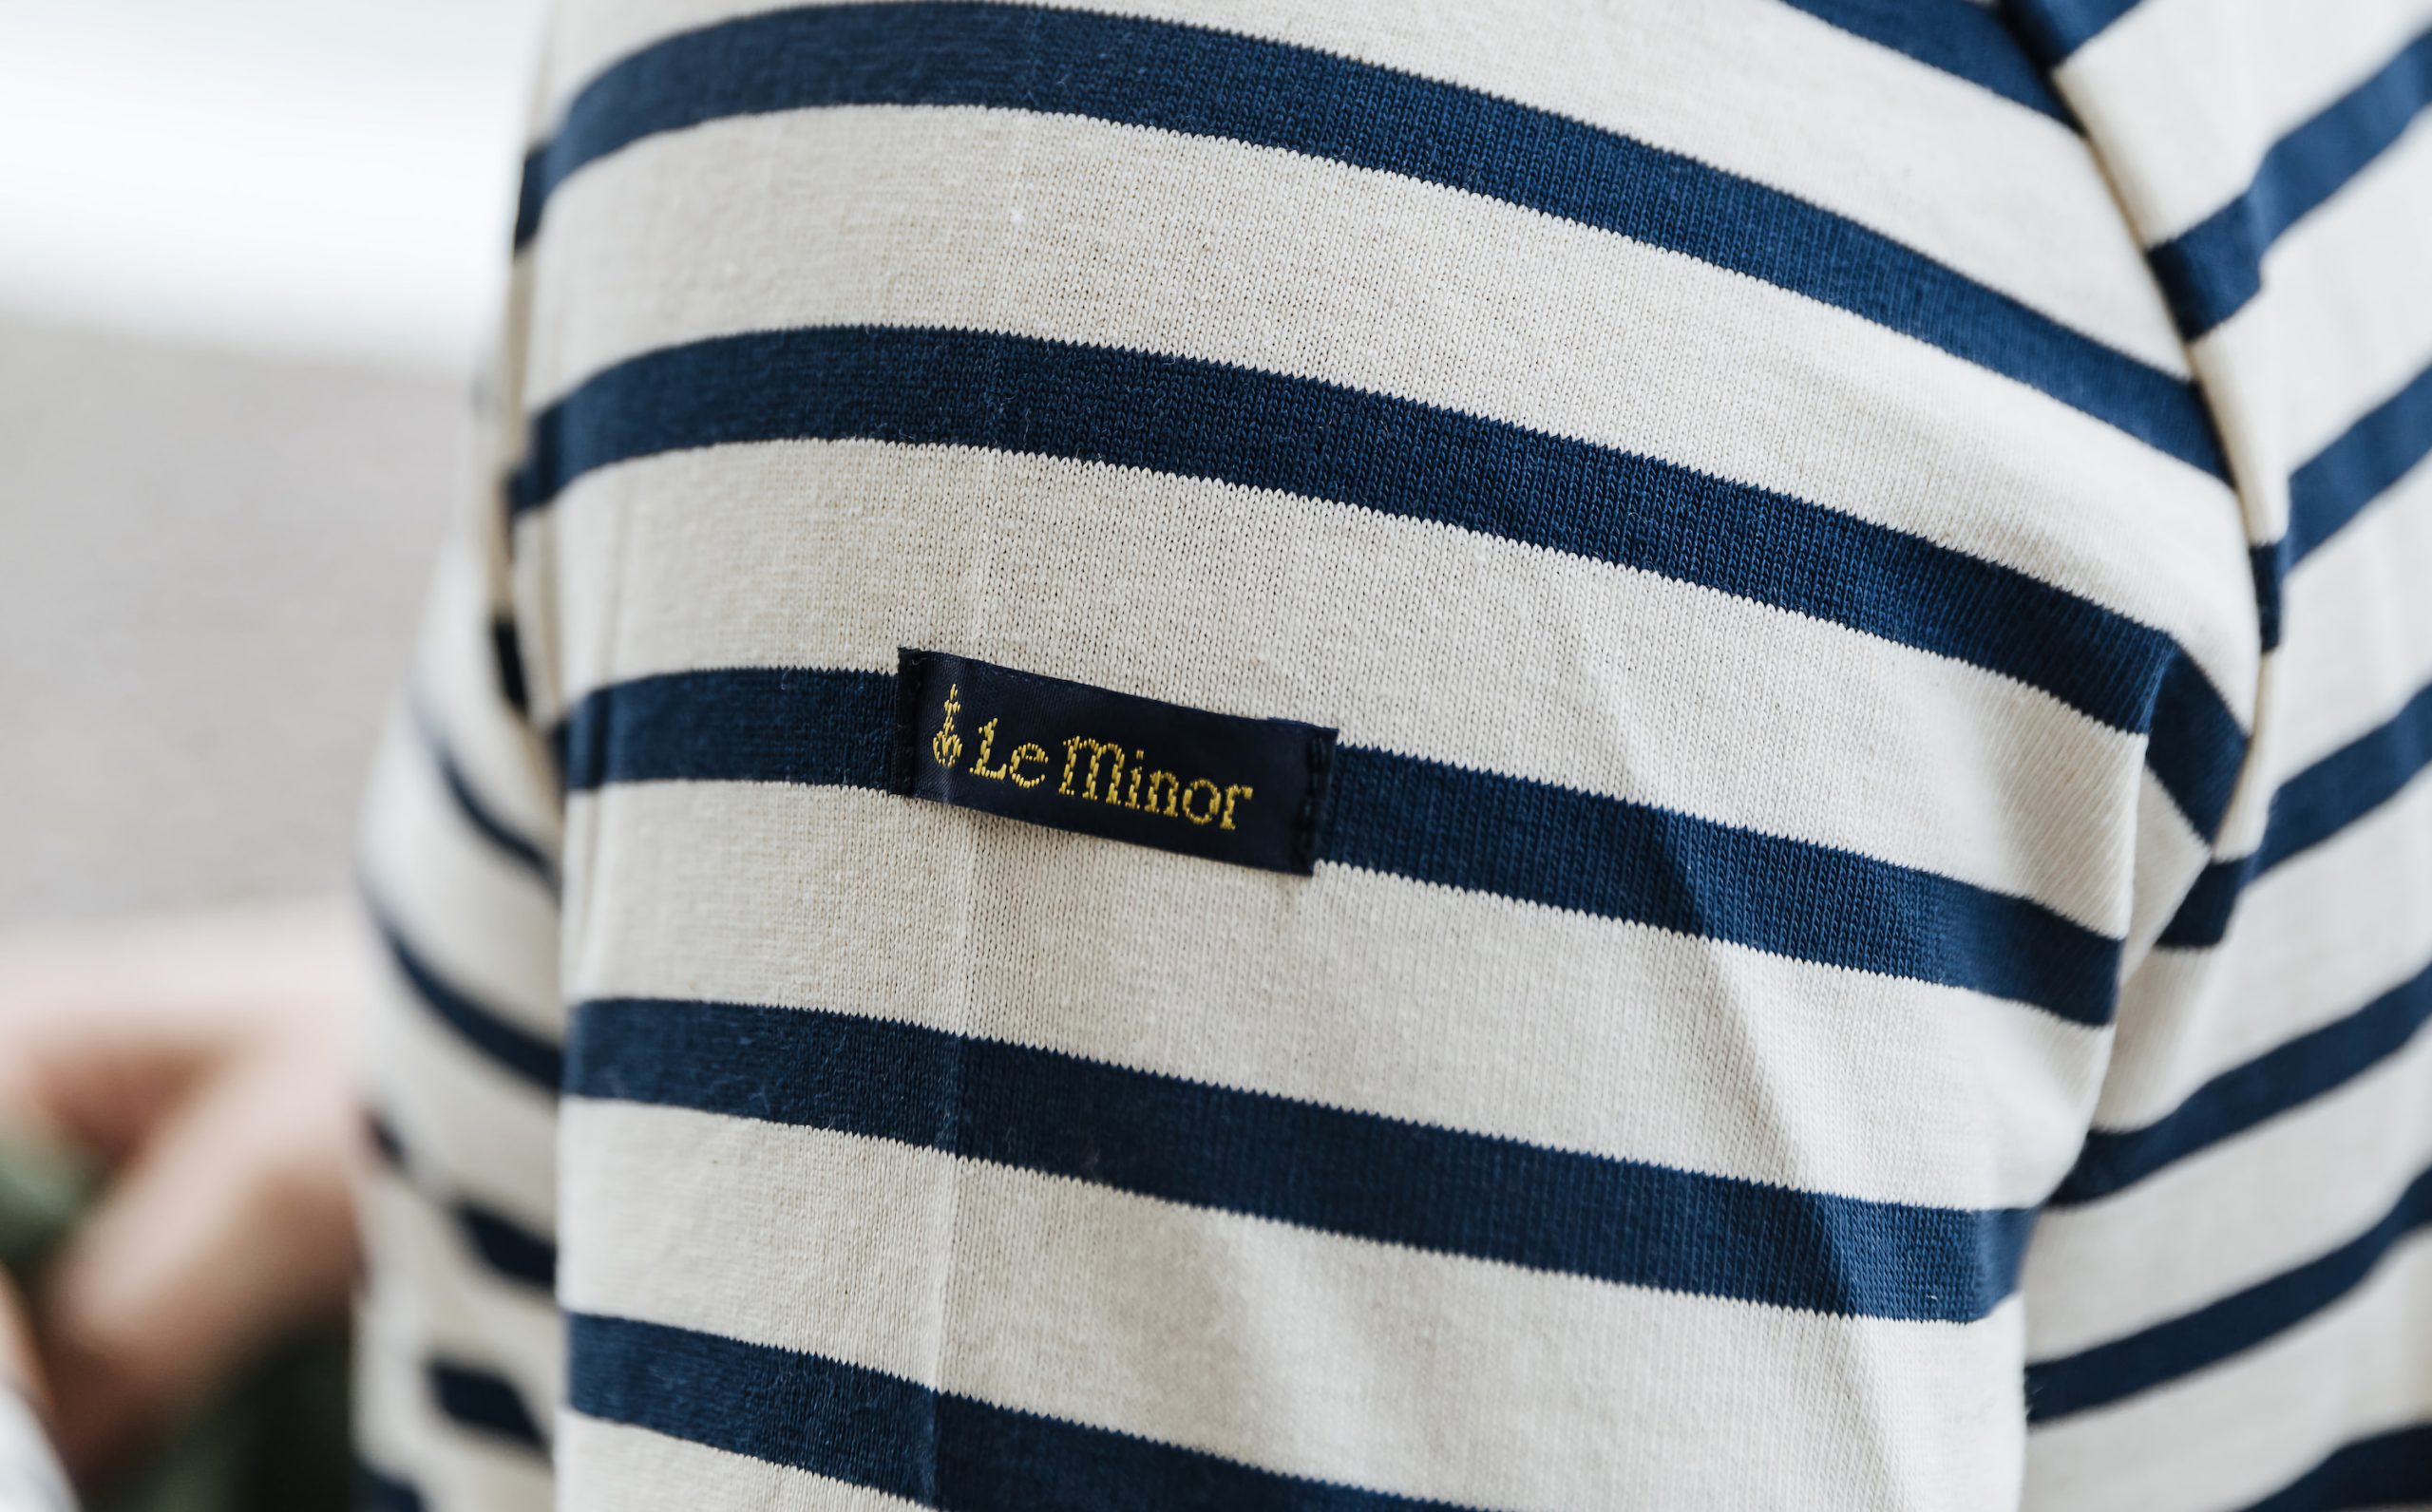 logo etiquette le minor made in france